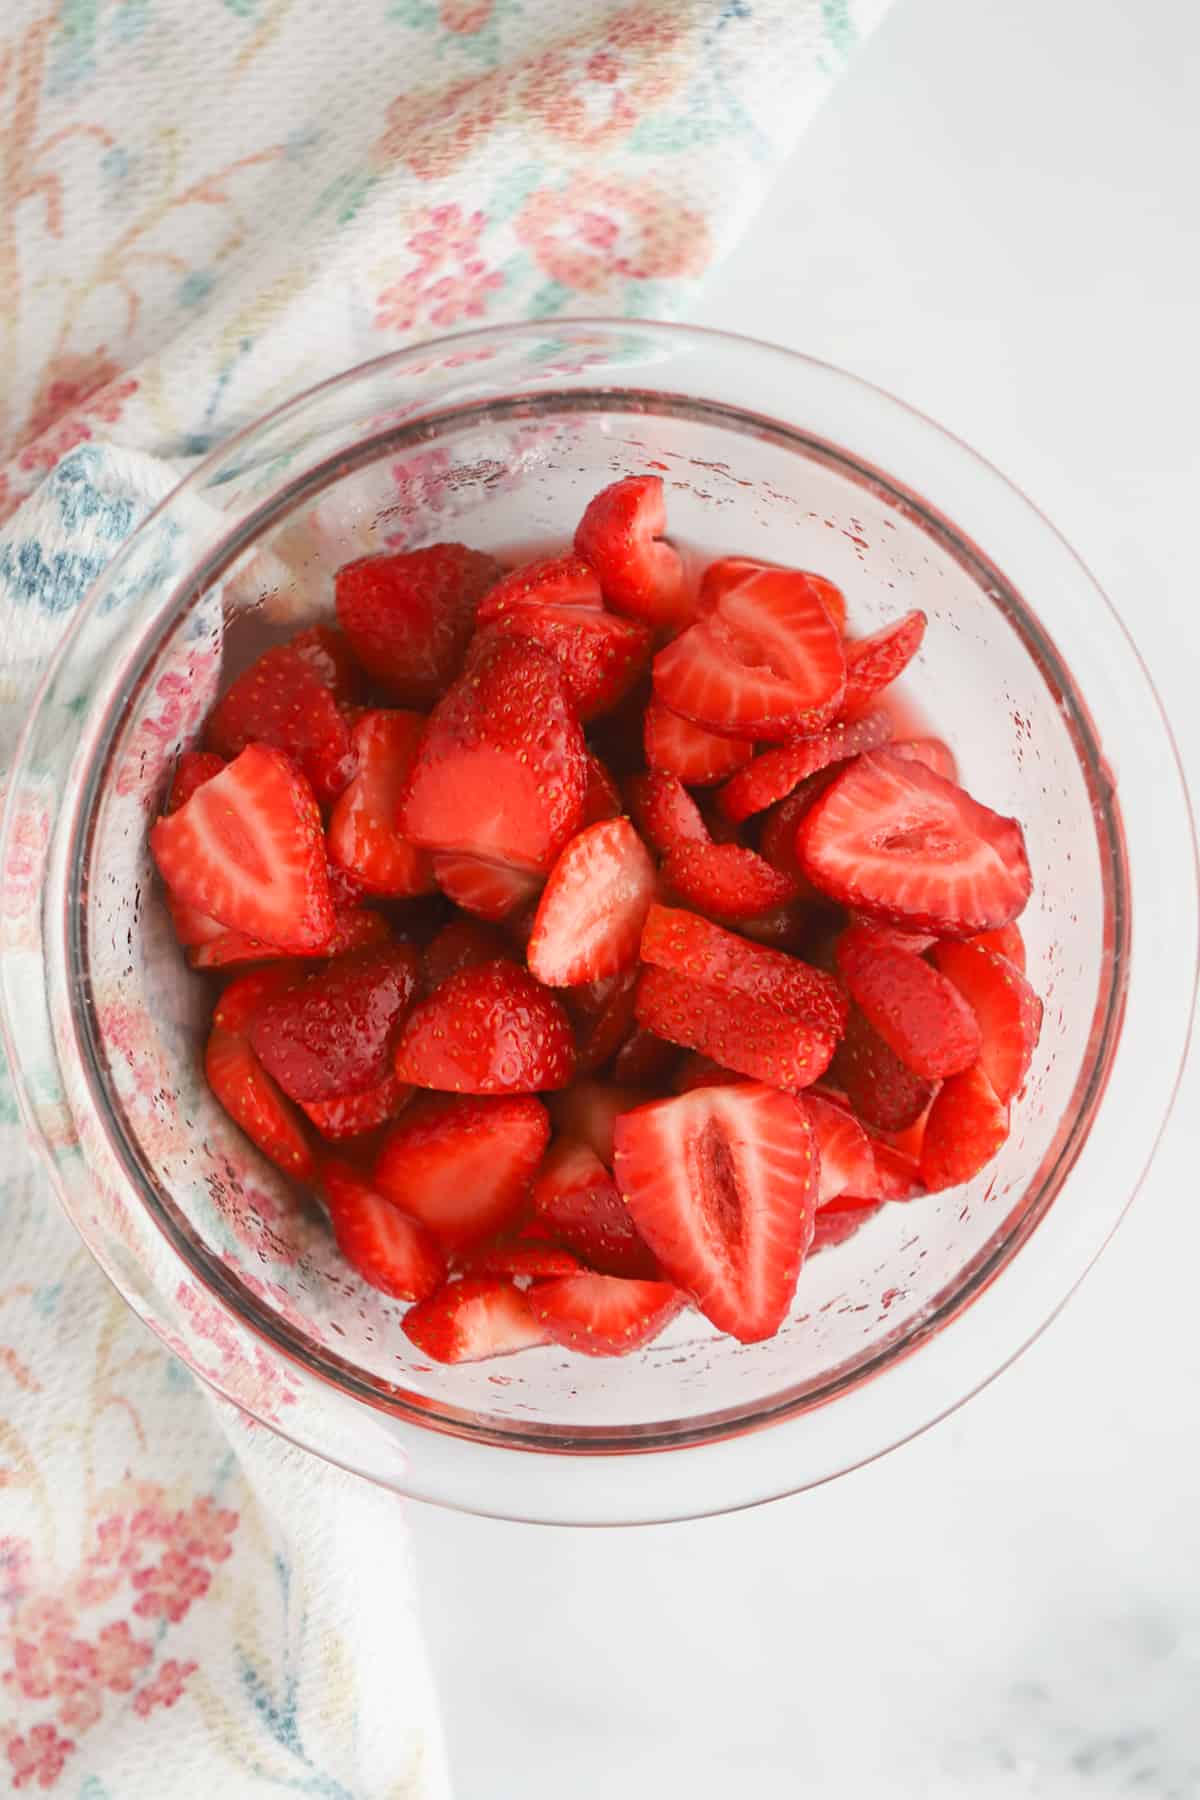 macerated strawberries in a small glass dish